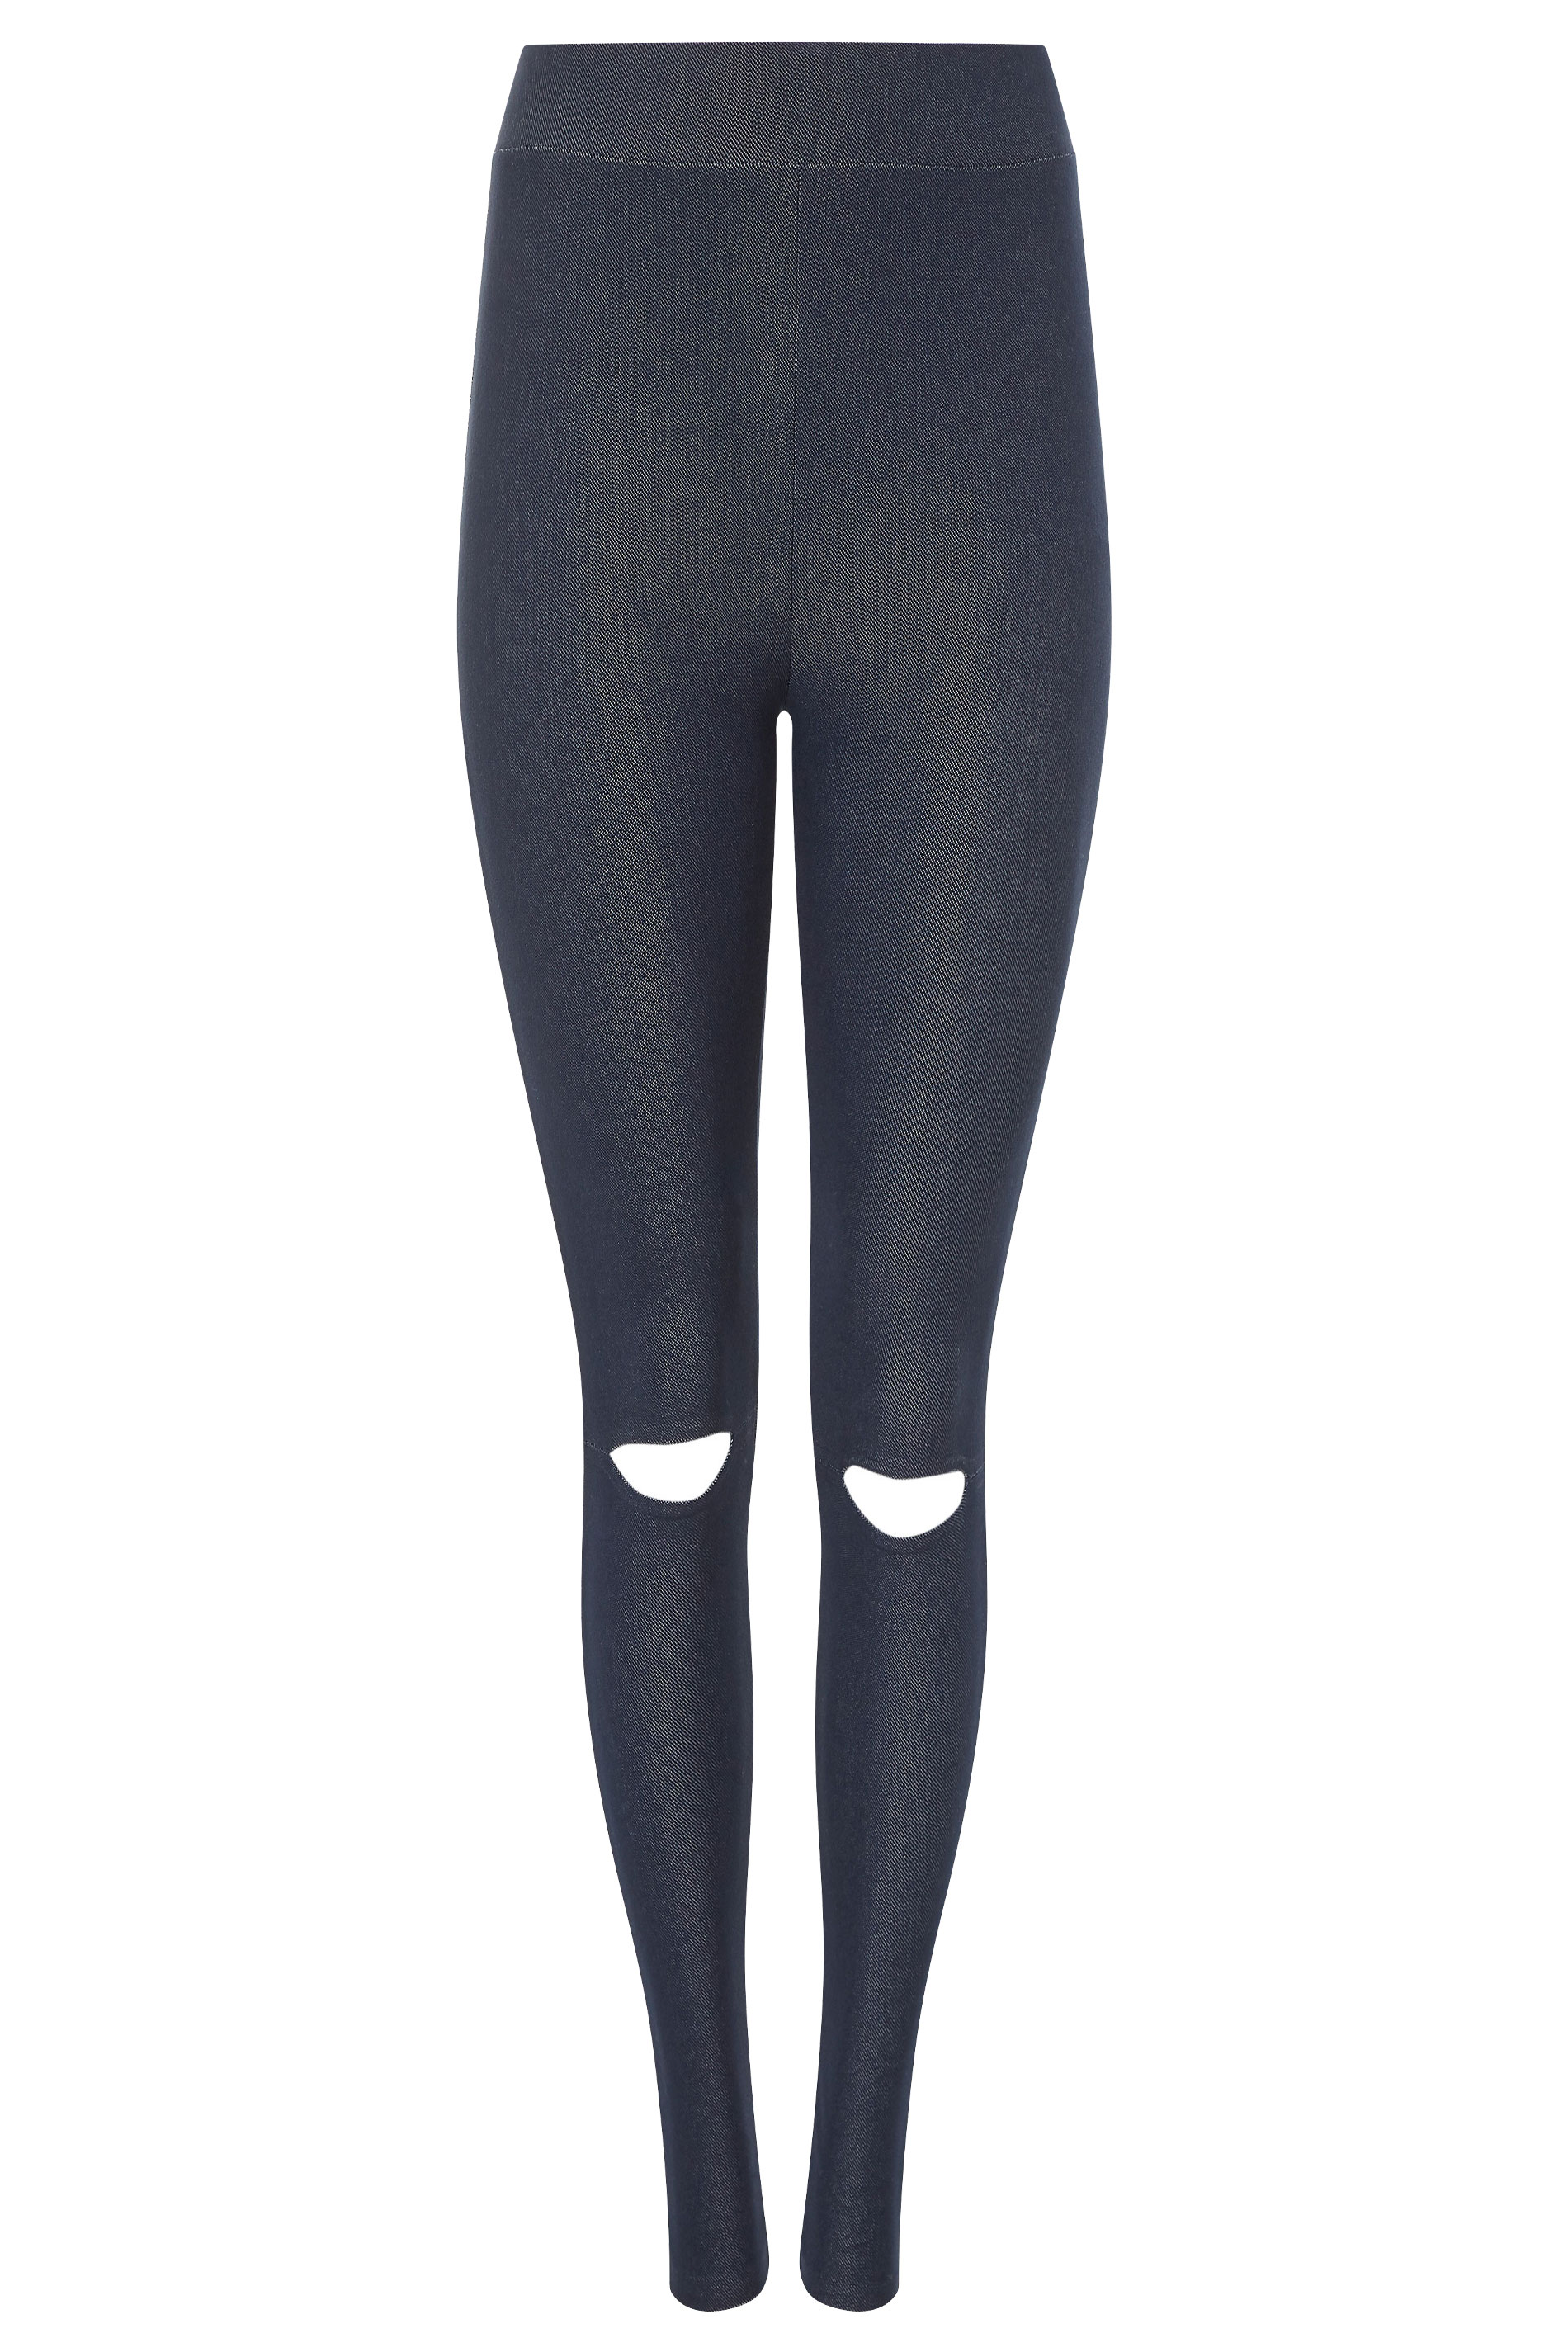 LTS Navy Blue Ripped Knee Jersey Jeggings | Long Tall Sally 1